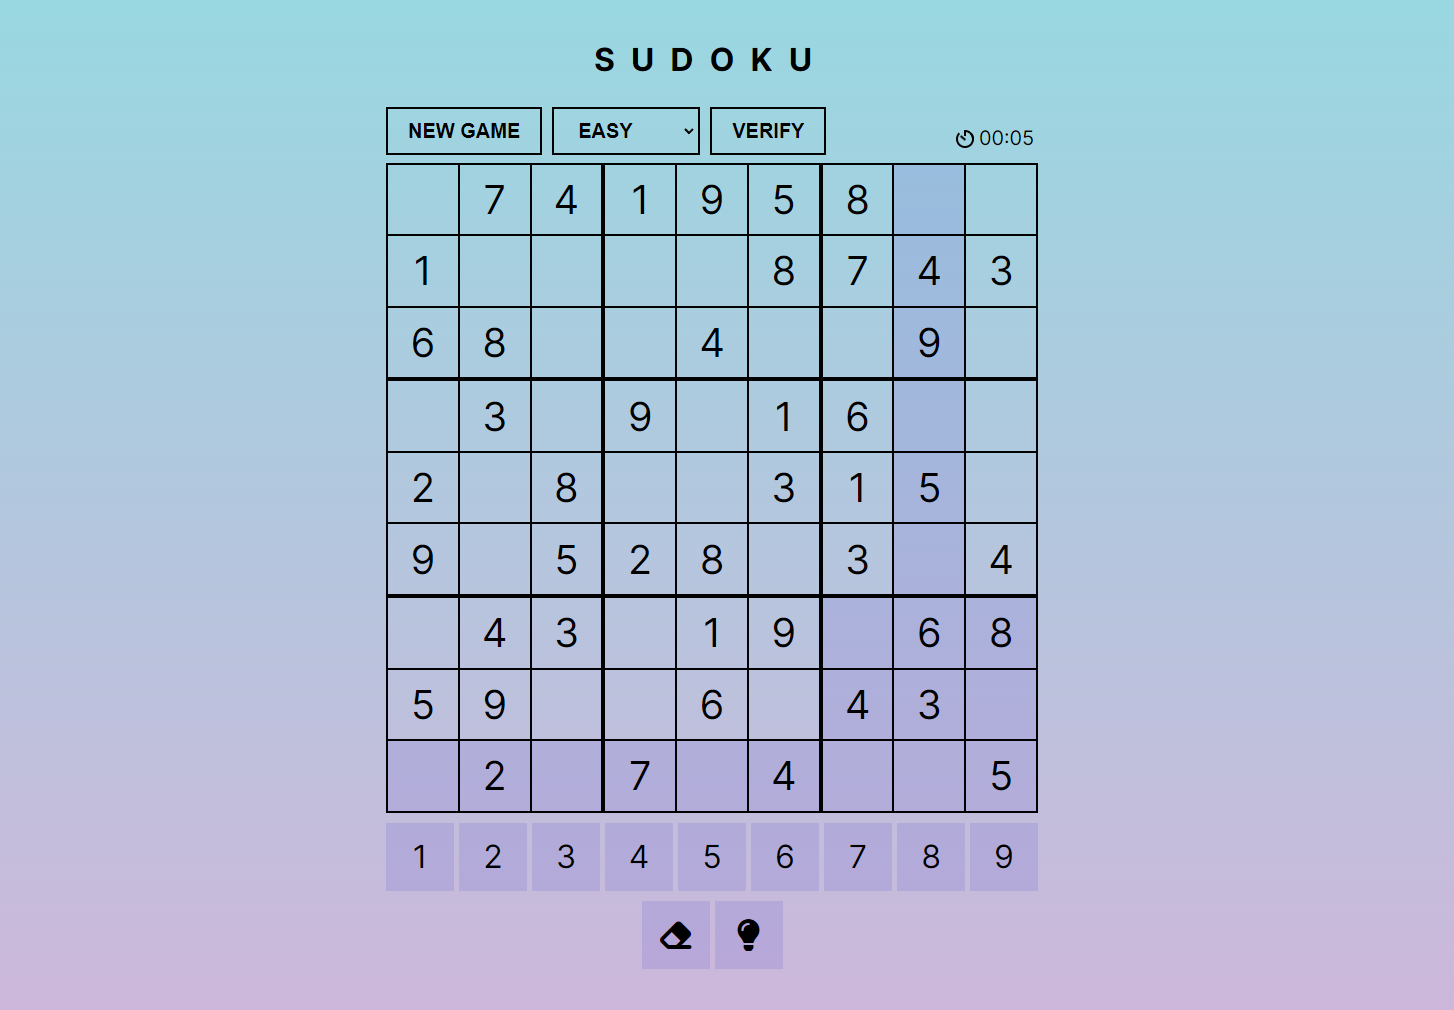 Another Sudoku on the Web